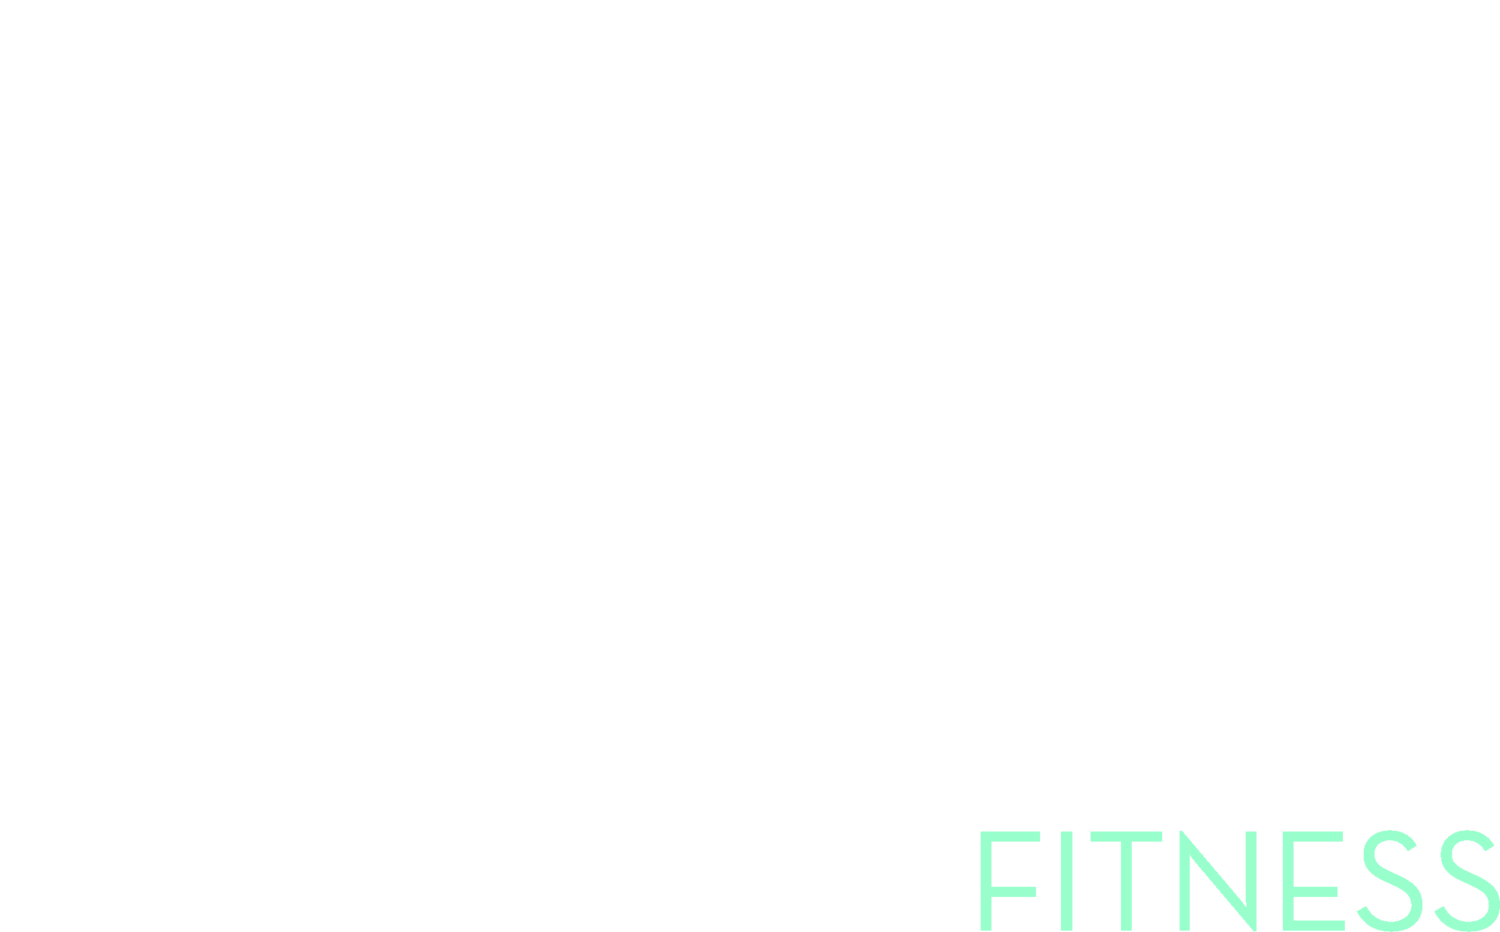 Weight clipart workout gear. Blog kayla fassio fit